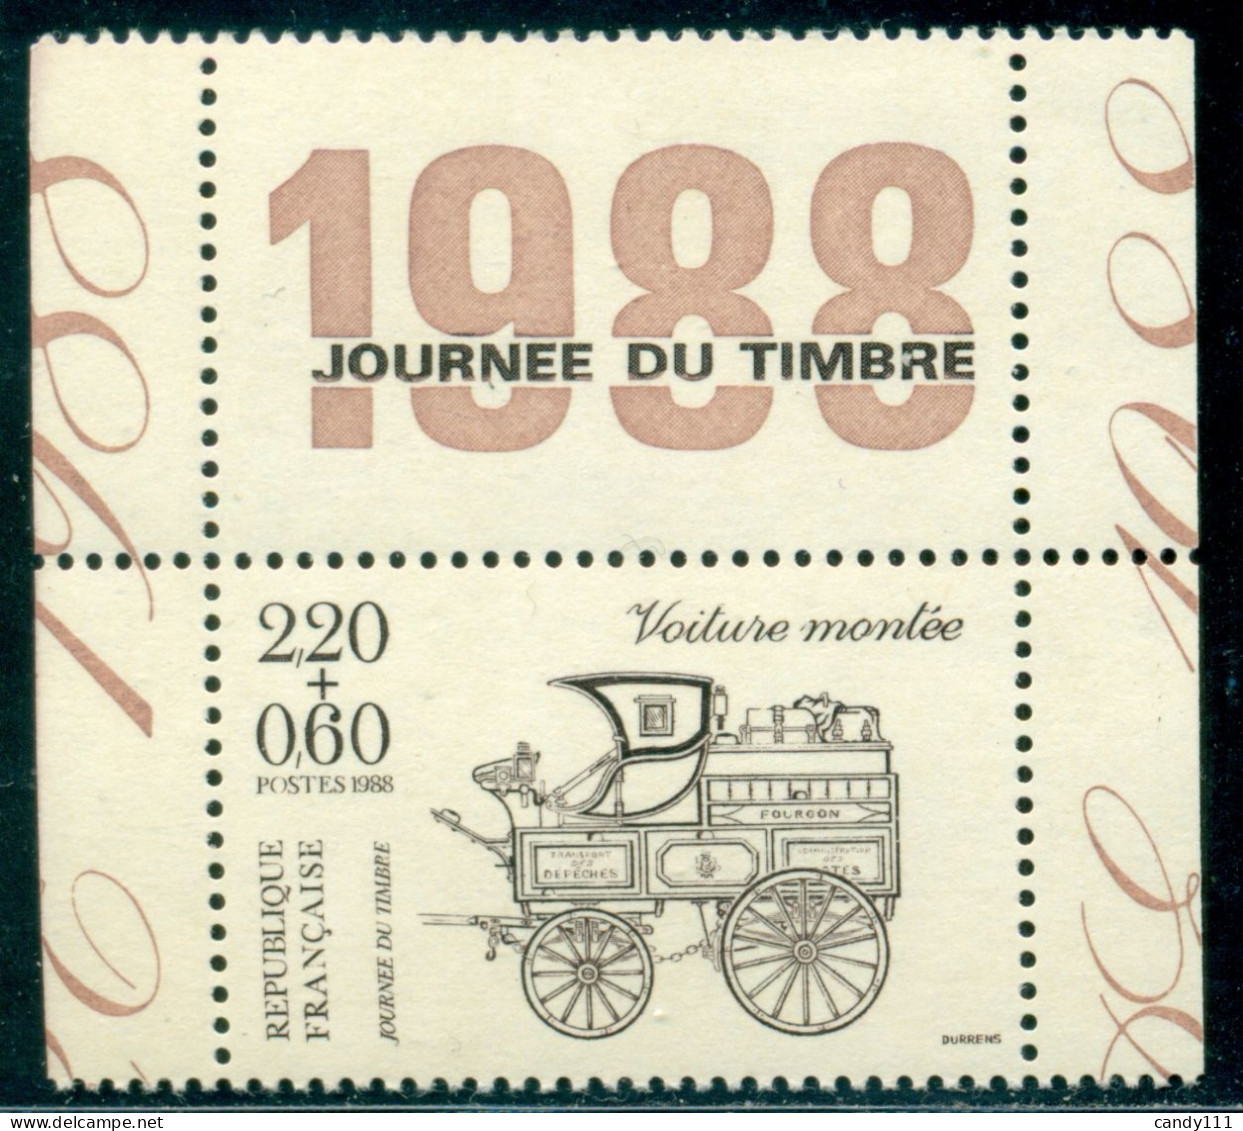 1988 Postal,post Coach,TOP TAB/1988,France,2662 Cb,MNH - Stage-Coaches